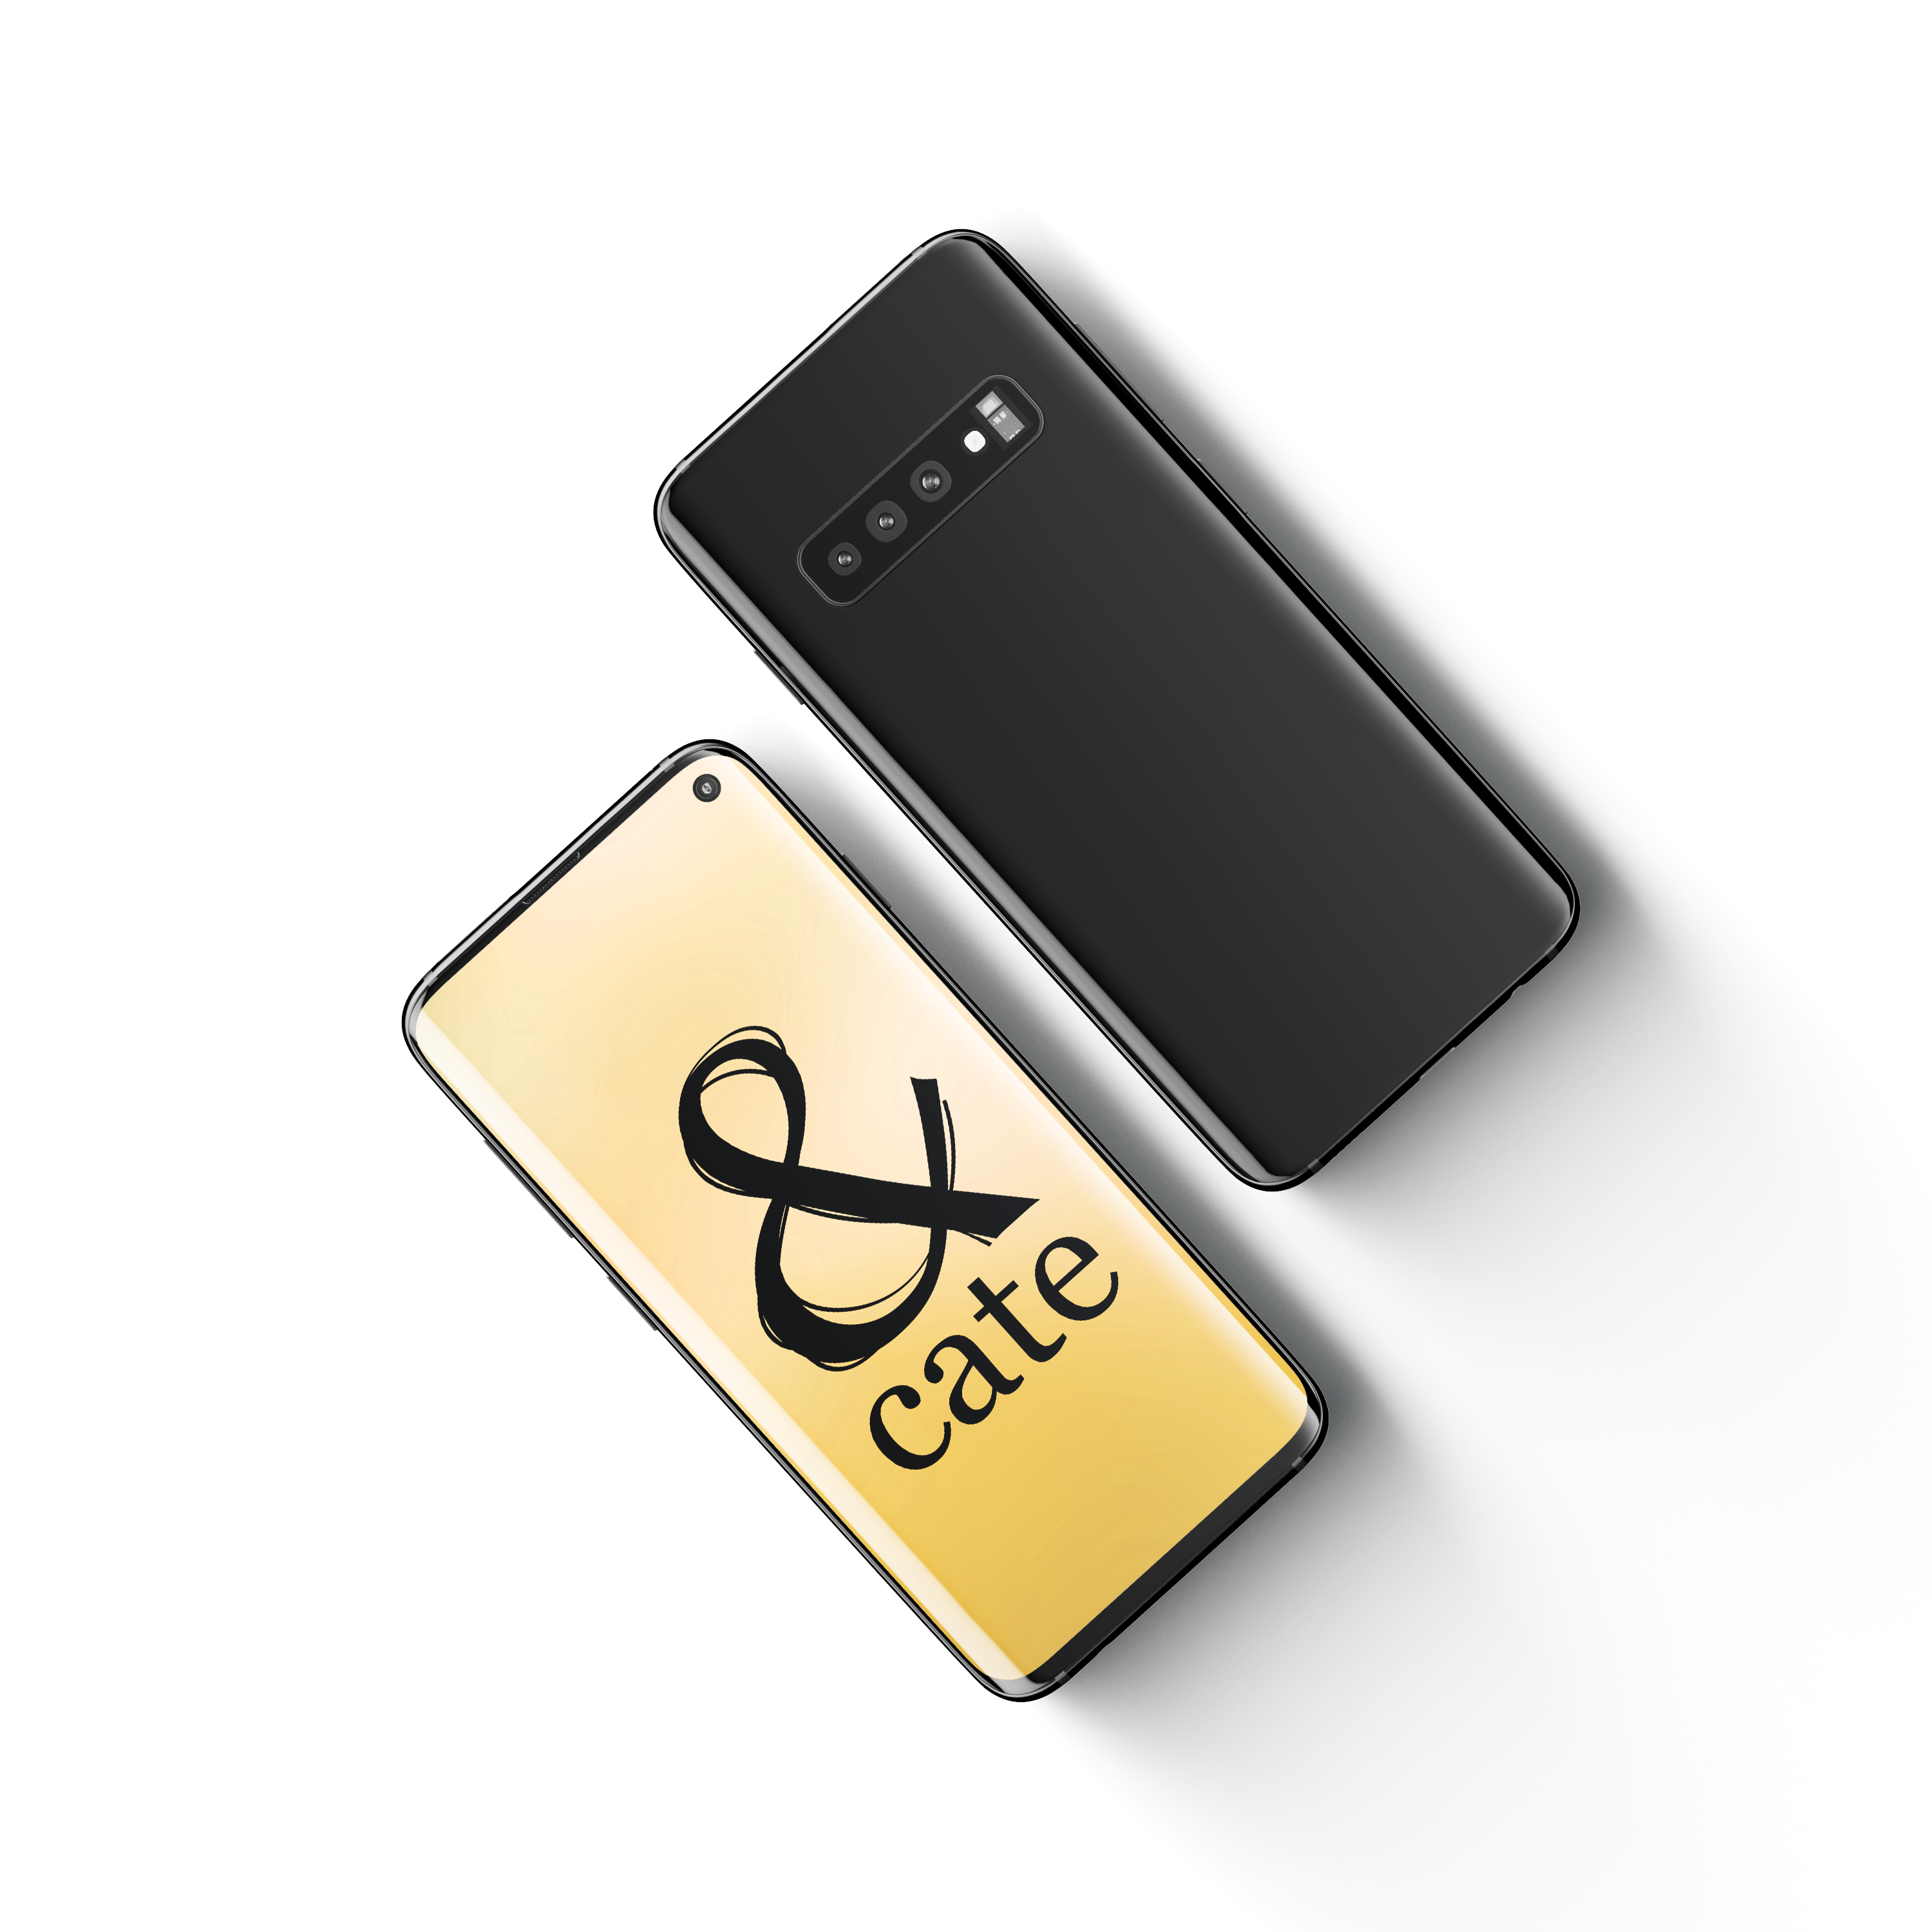 Mockup of Cate's branding on a Samsung phone